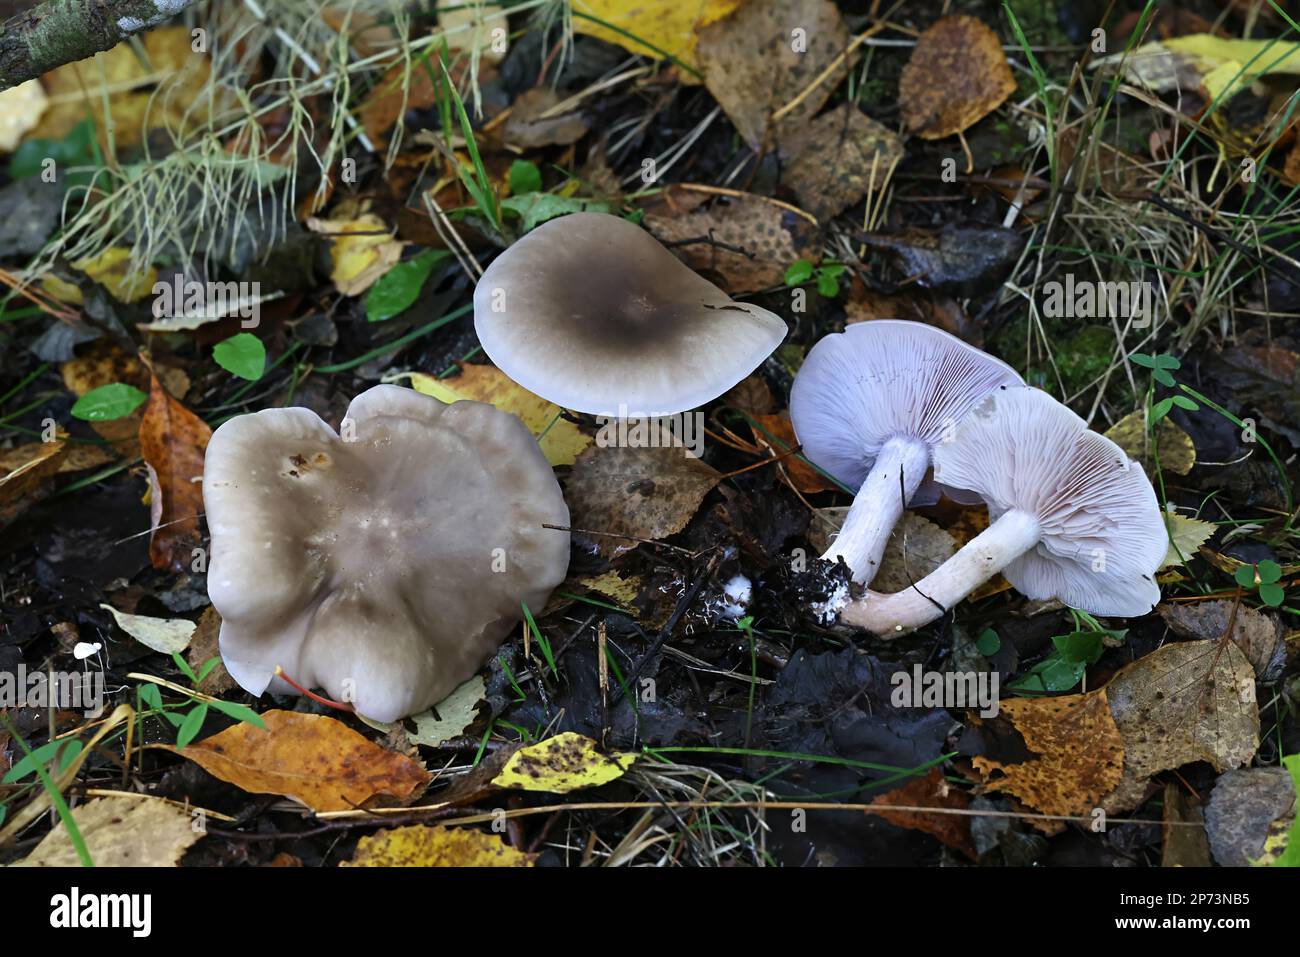 Lepista nuda, known as the Wood Blewit, wild mushroom from Finland Stock Photo